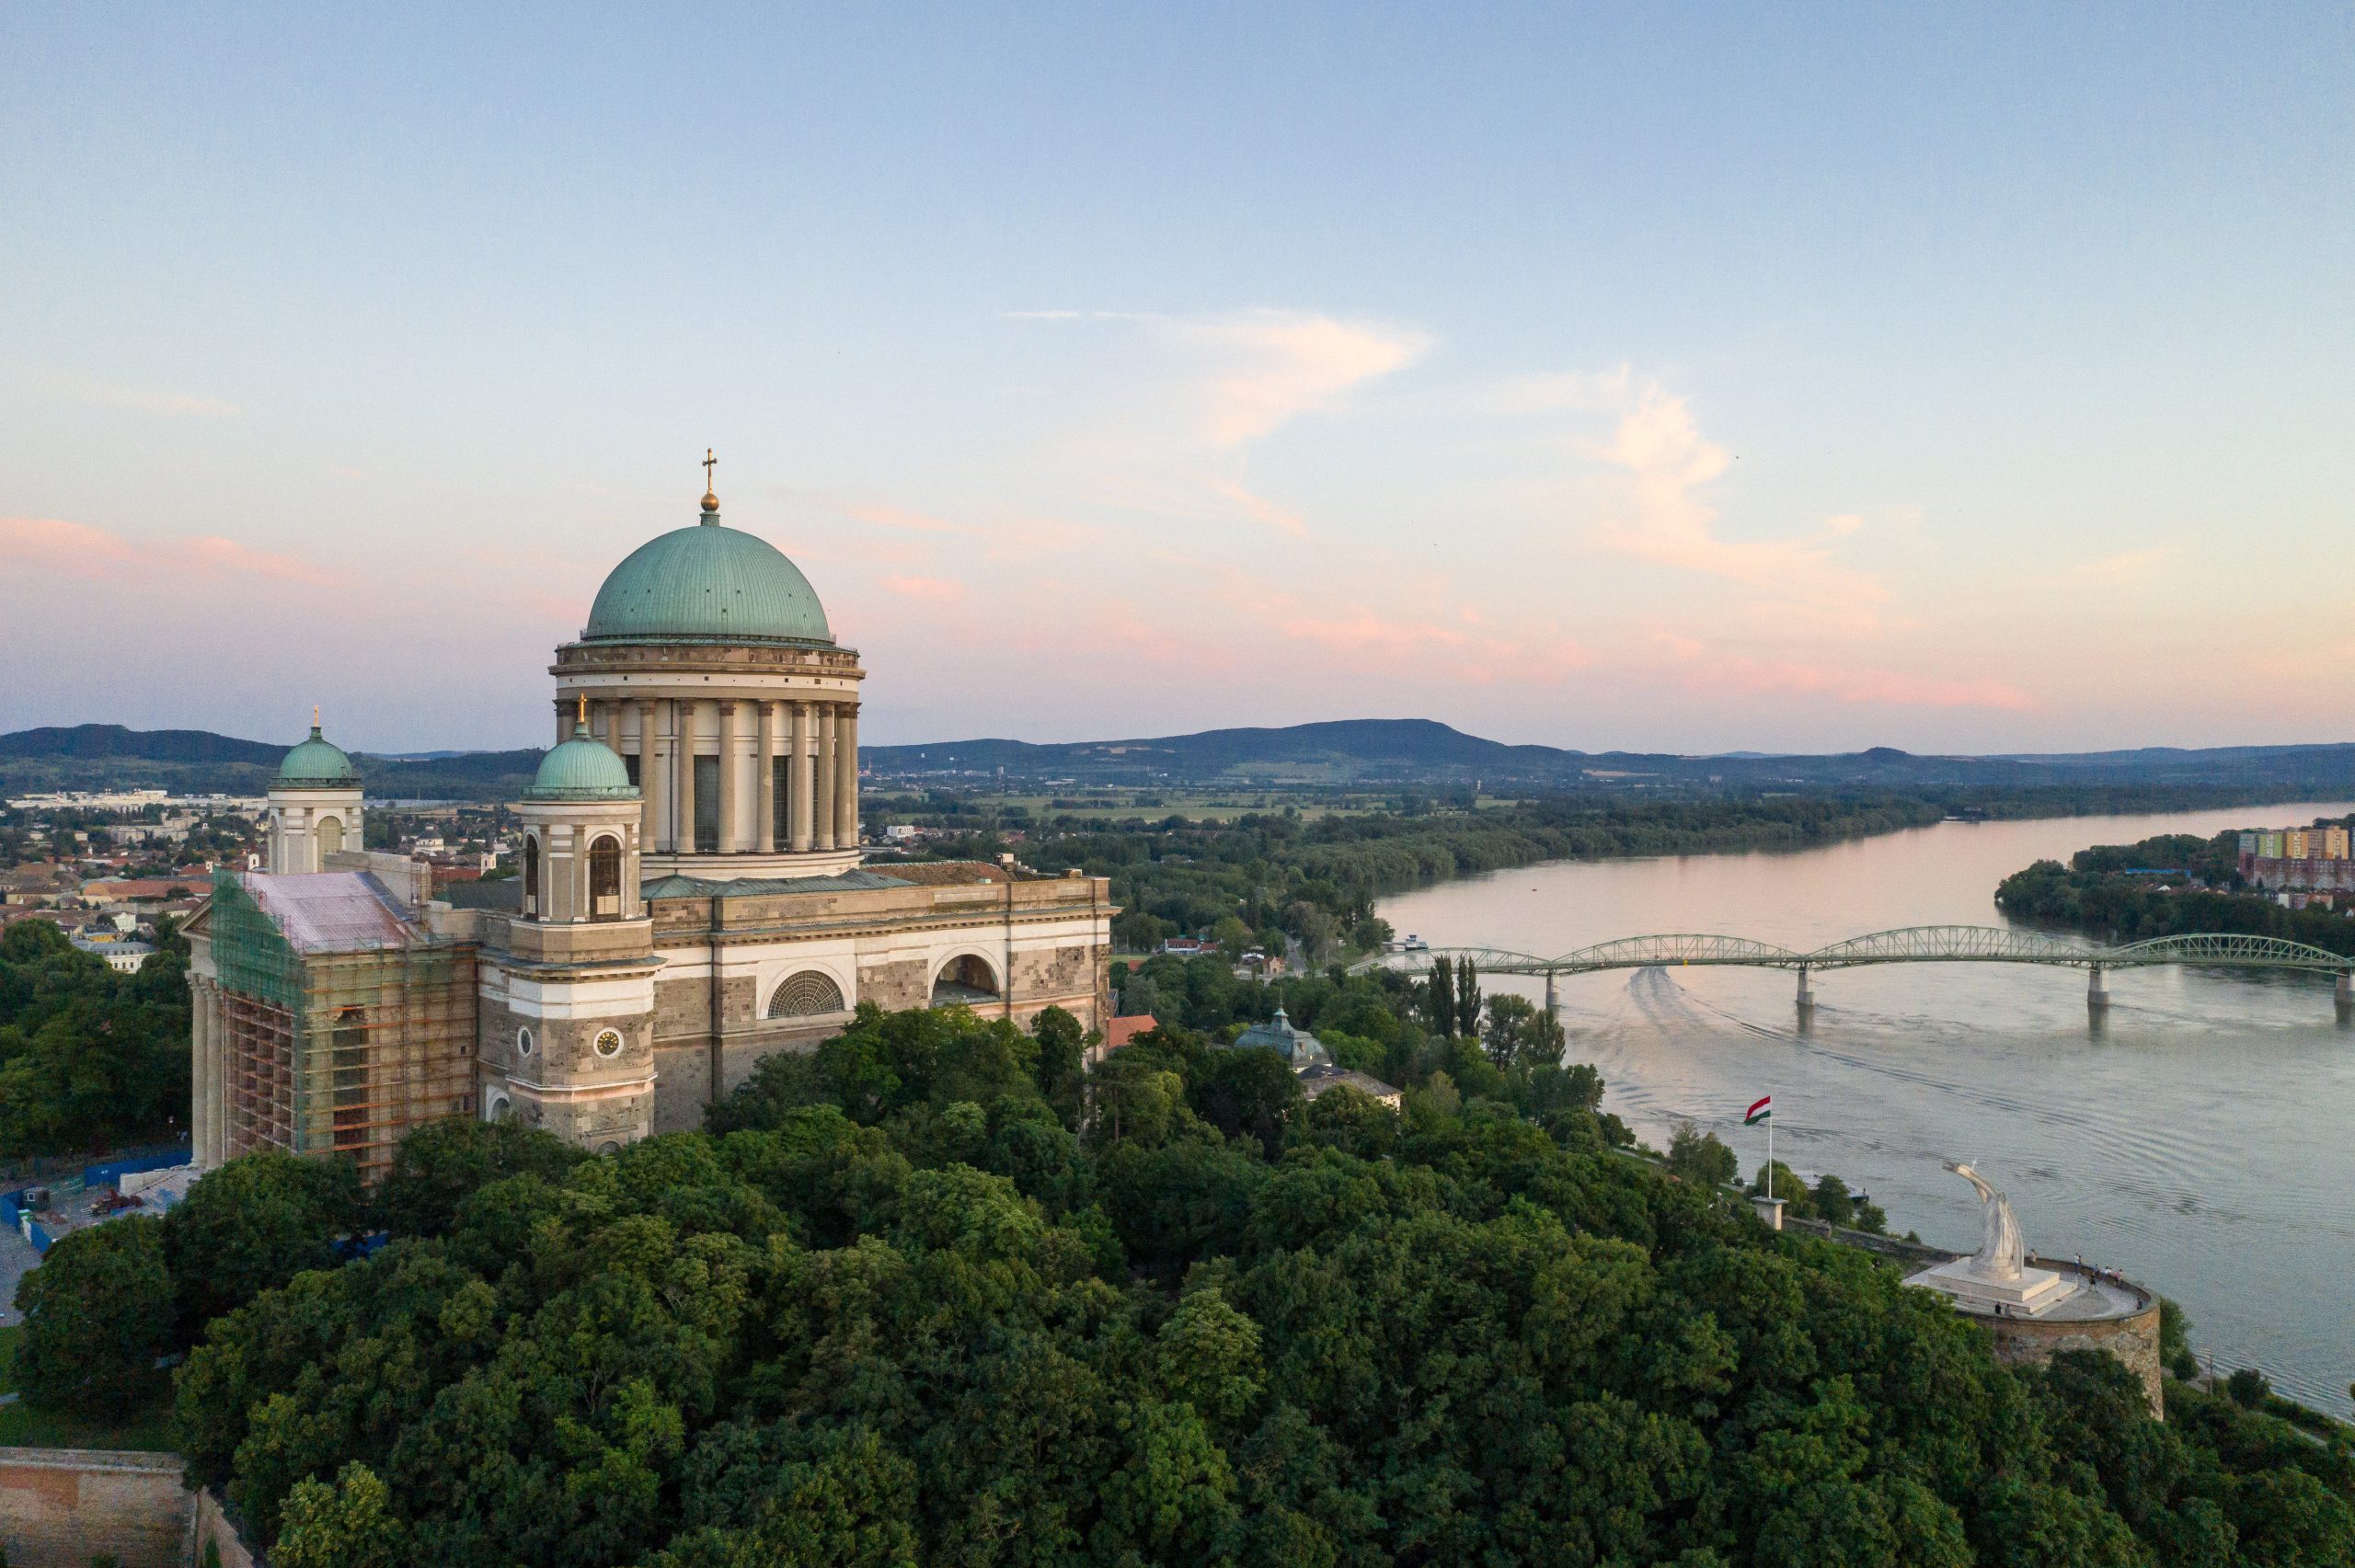 176-Year-Old Time Capsule Recovered in Cross of Esztergom Basilica